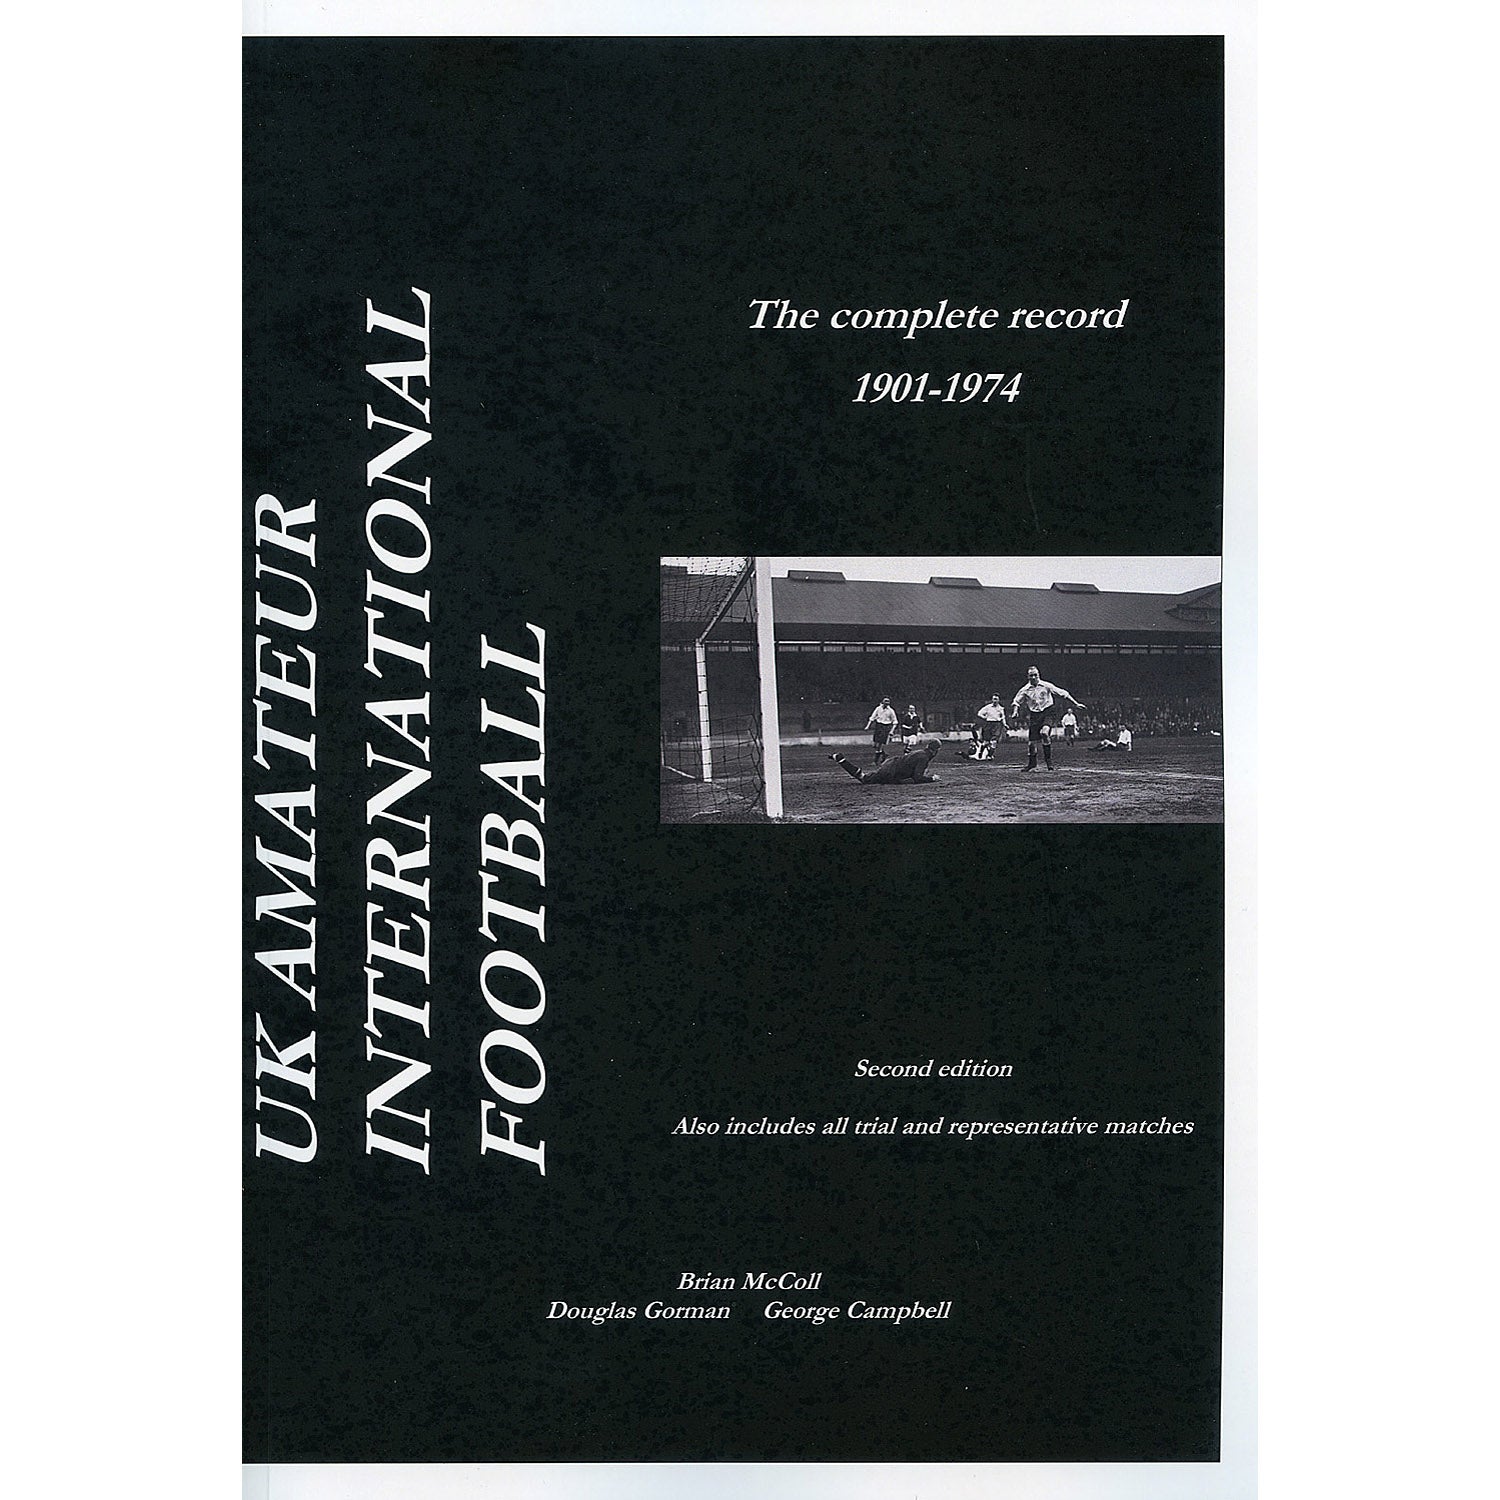 UK Amateur International Football – The complete record 1901-1974